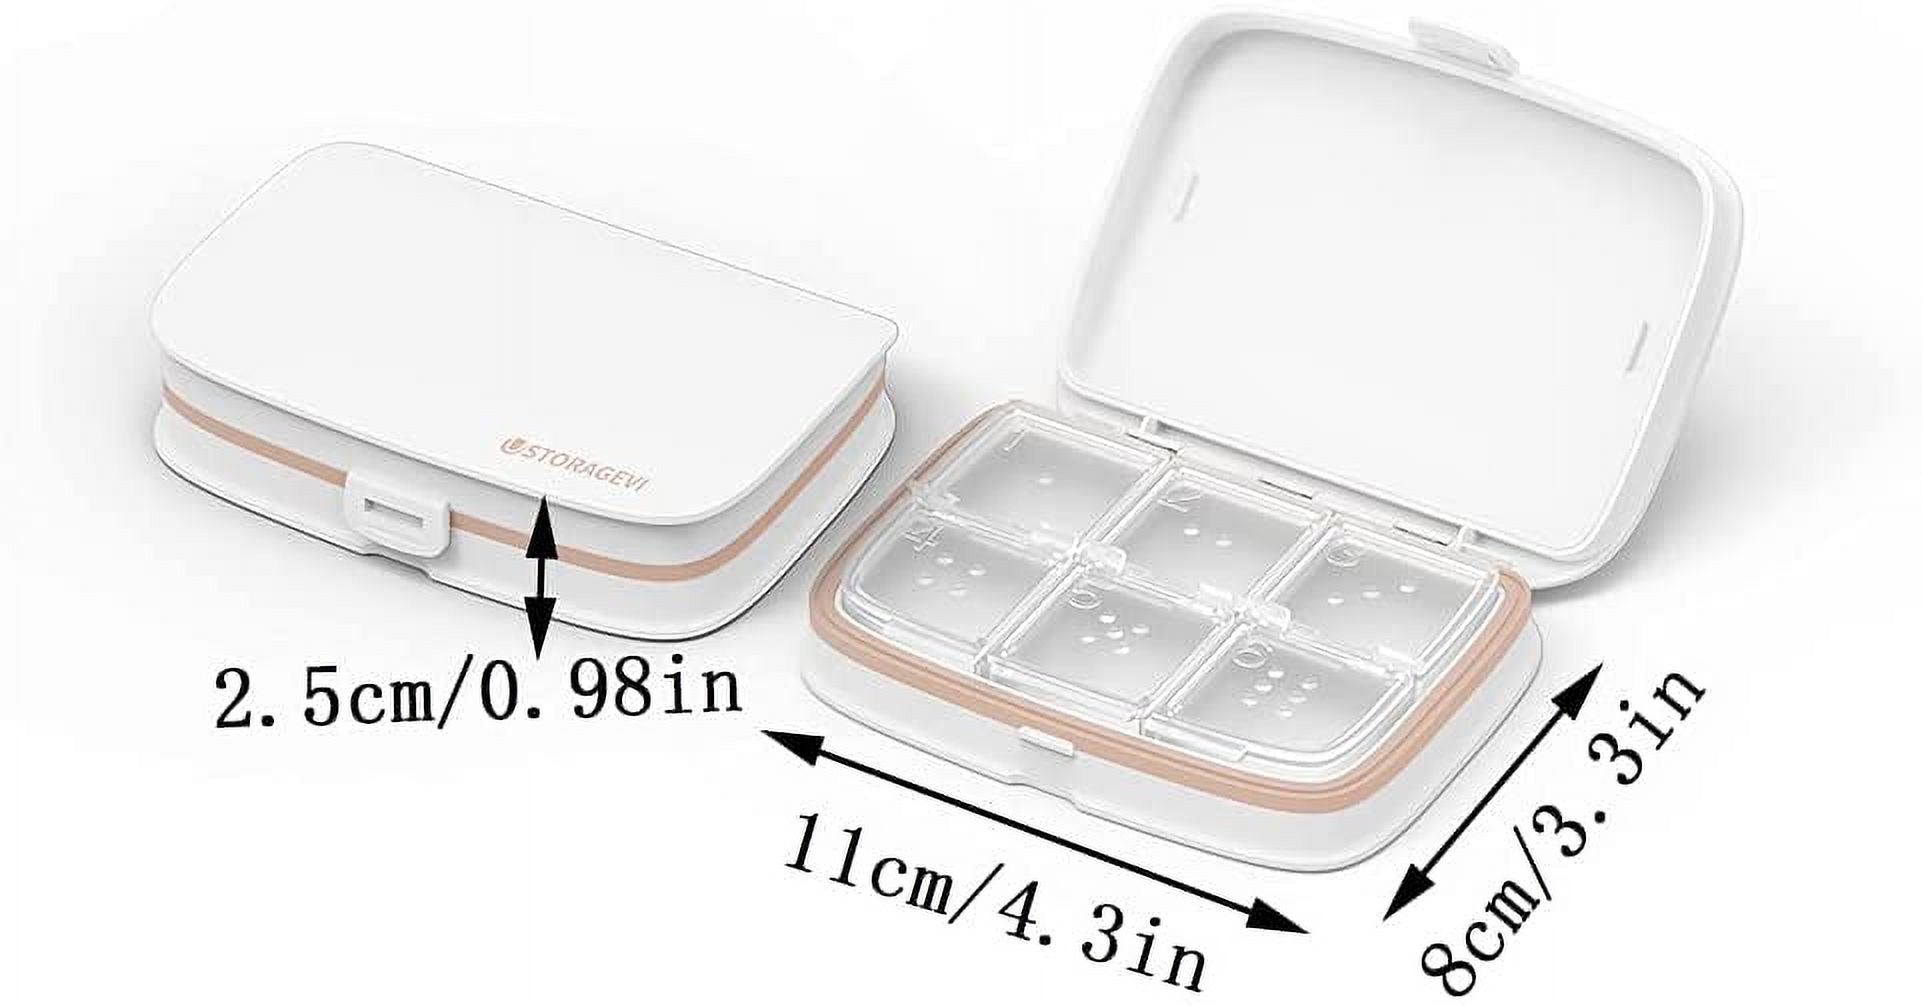 SUNFICON Daily Pill Box Organizer Container Portable Travel Medicine Pill Case Vitamin Arthritis Medication Storage Box for Purse Removable Adjustable Waterproof Dust Proof 6 Compartments White - image 3 of 8